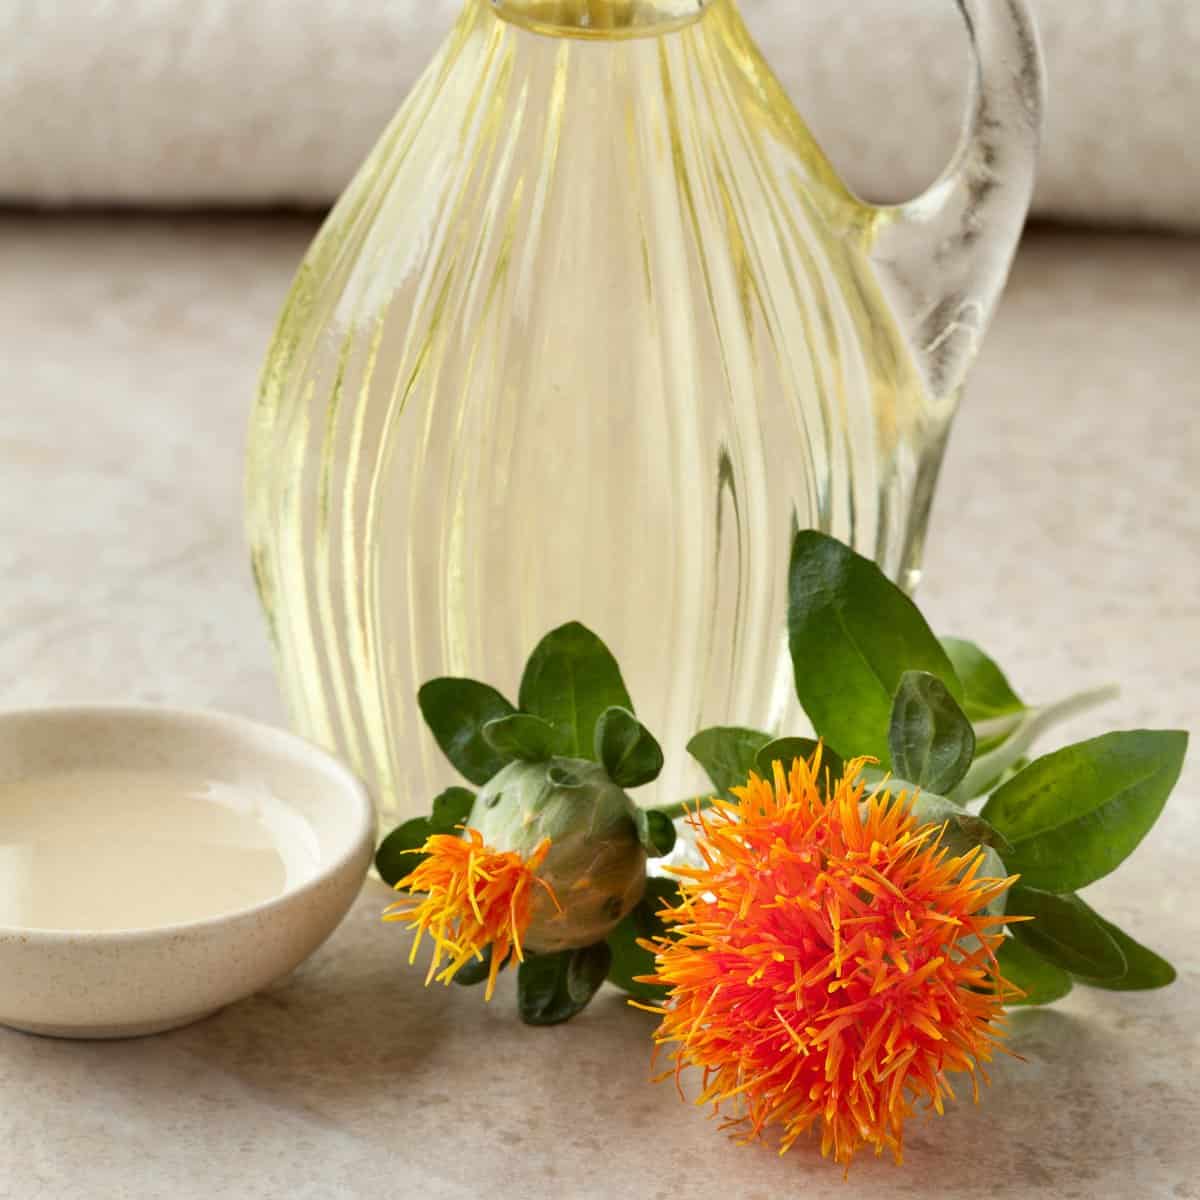 What is safflower oil